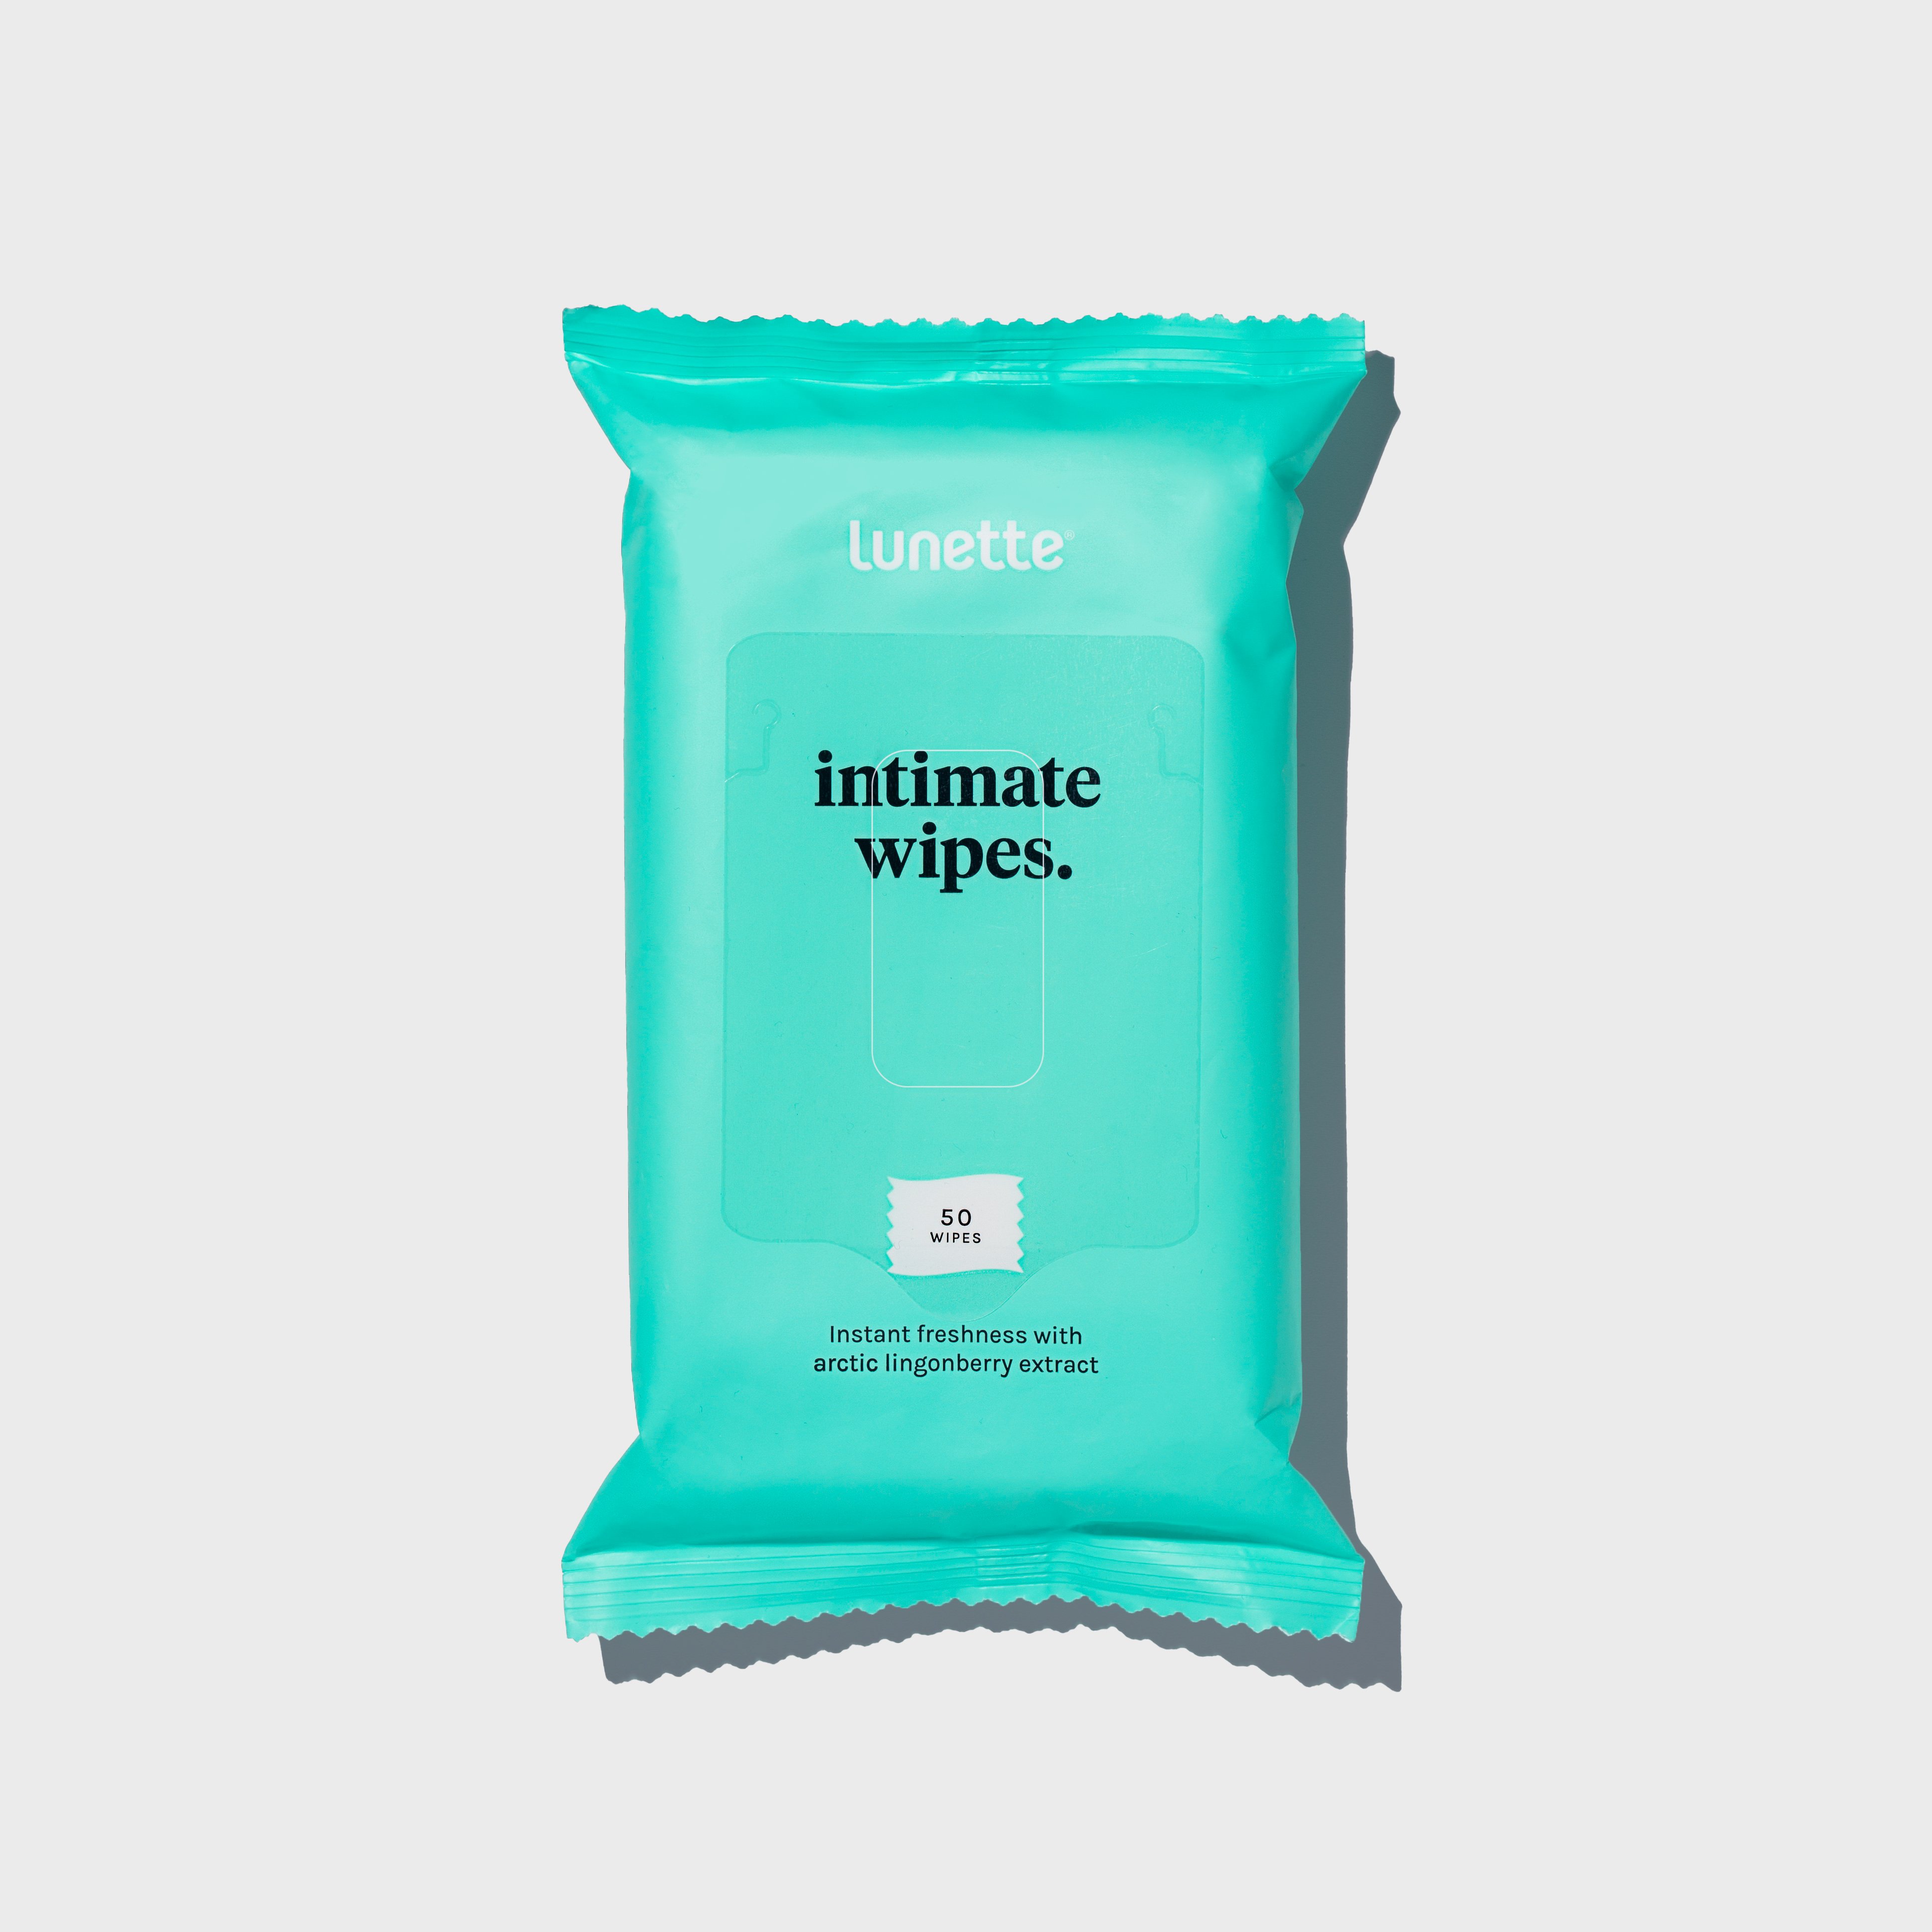 Lunette_Intimate_wipes_grey_highres-2-1